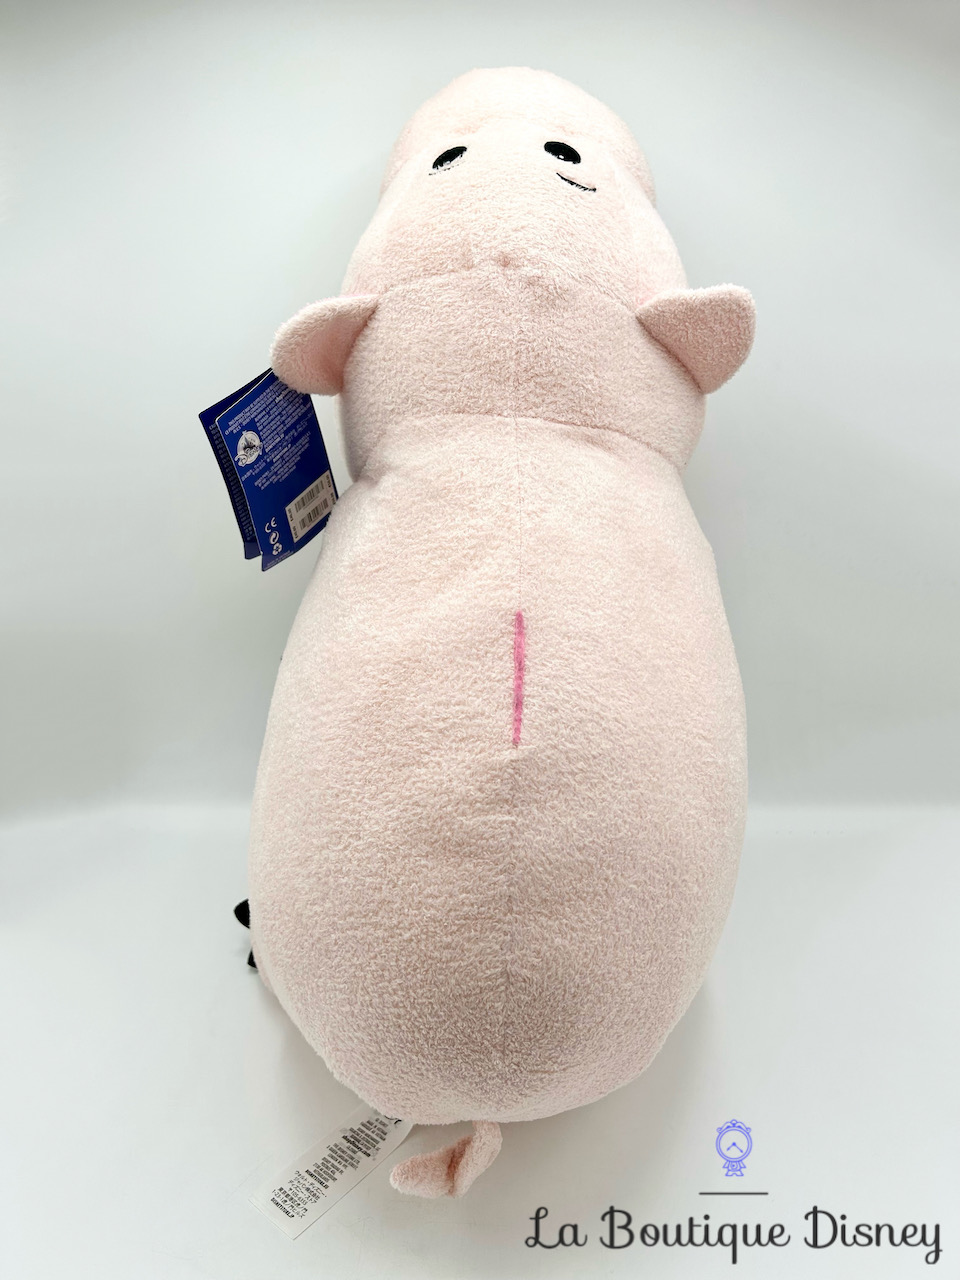 peluche-bayonne-xxl-cochon-rose-toy-story-disney-store-grand-format-grande-taille-6